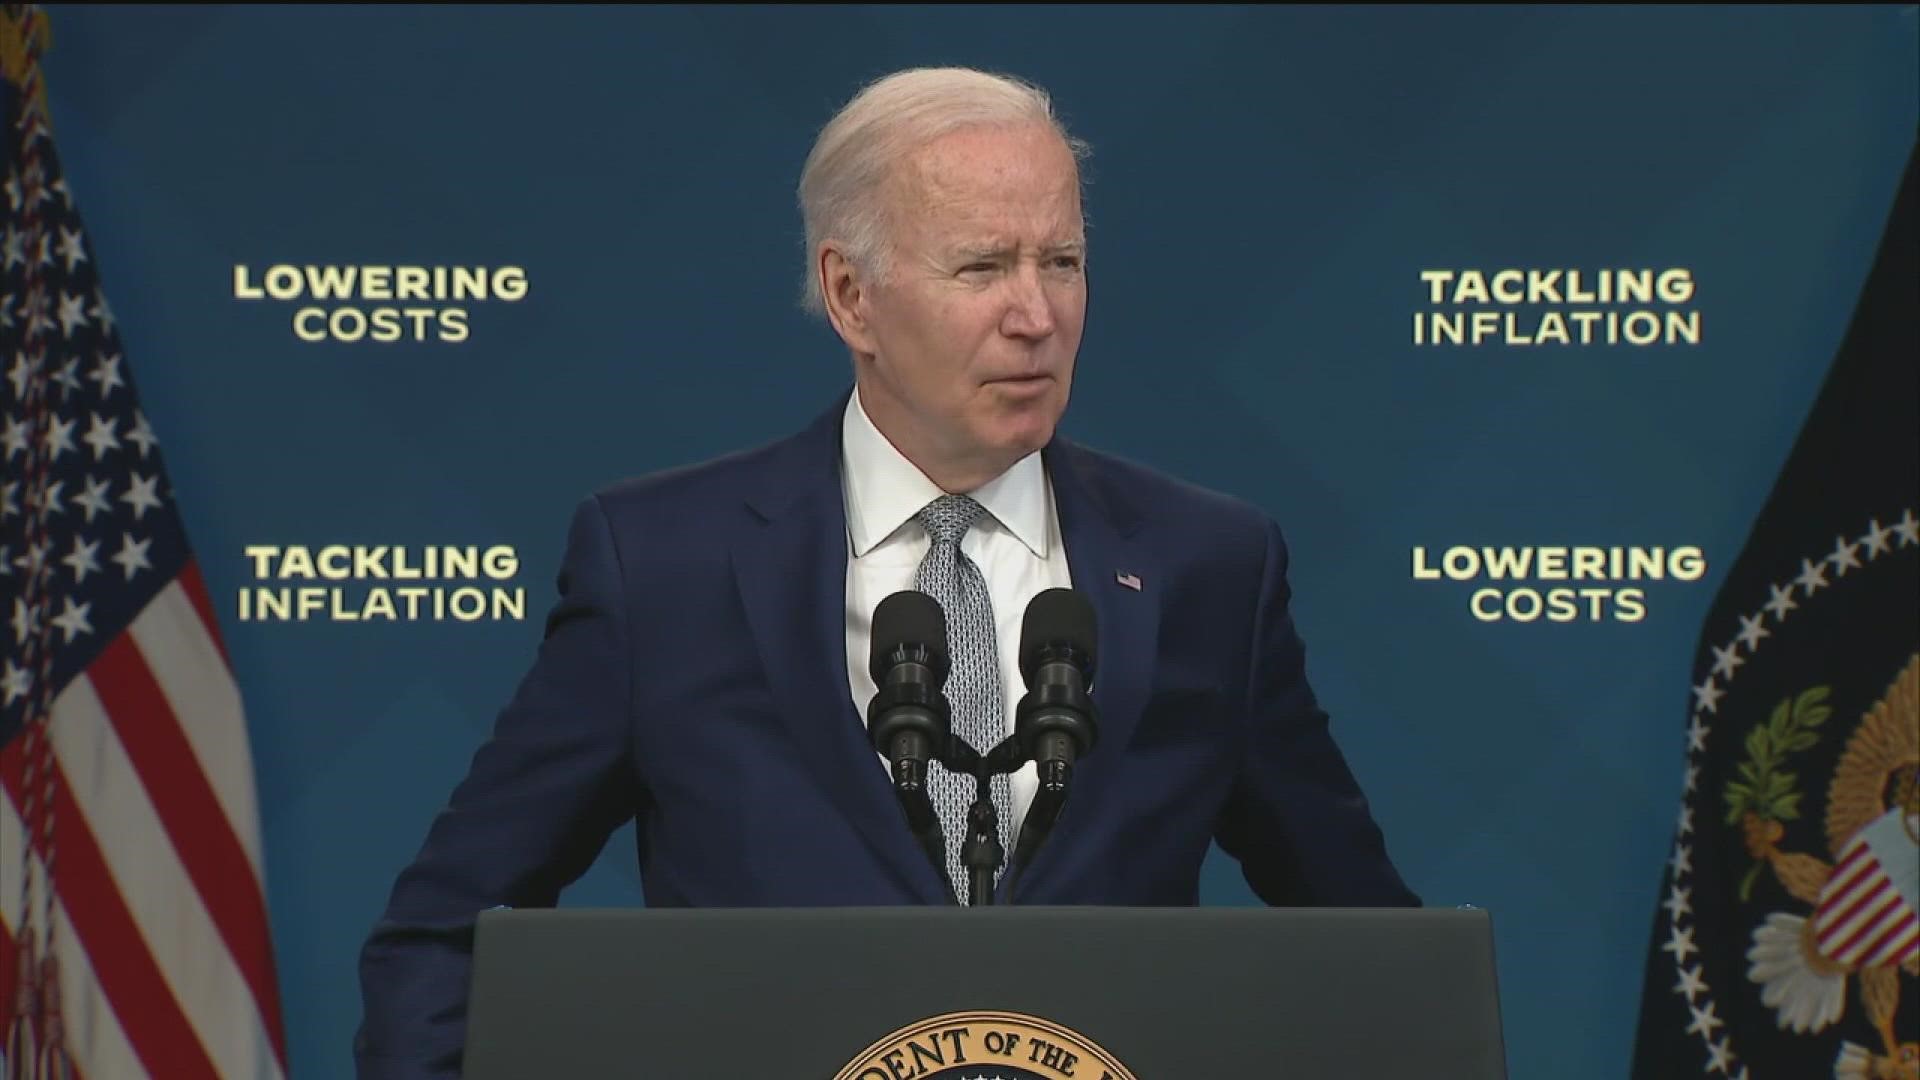 Inflation is taking center stage in the run-up to the midterm elections. On Tuesday, President Biden laid out his plan for relief.